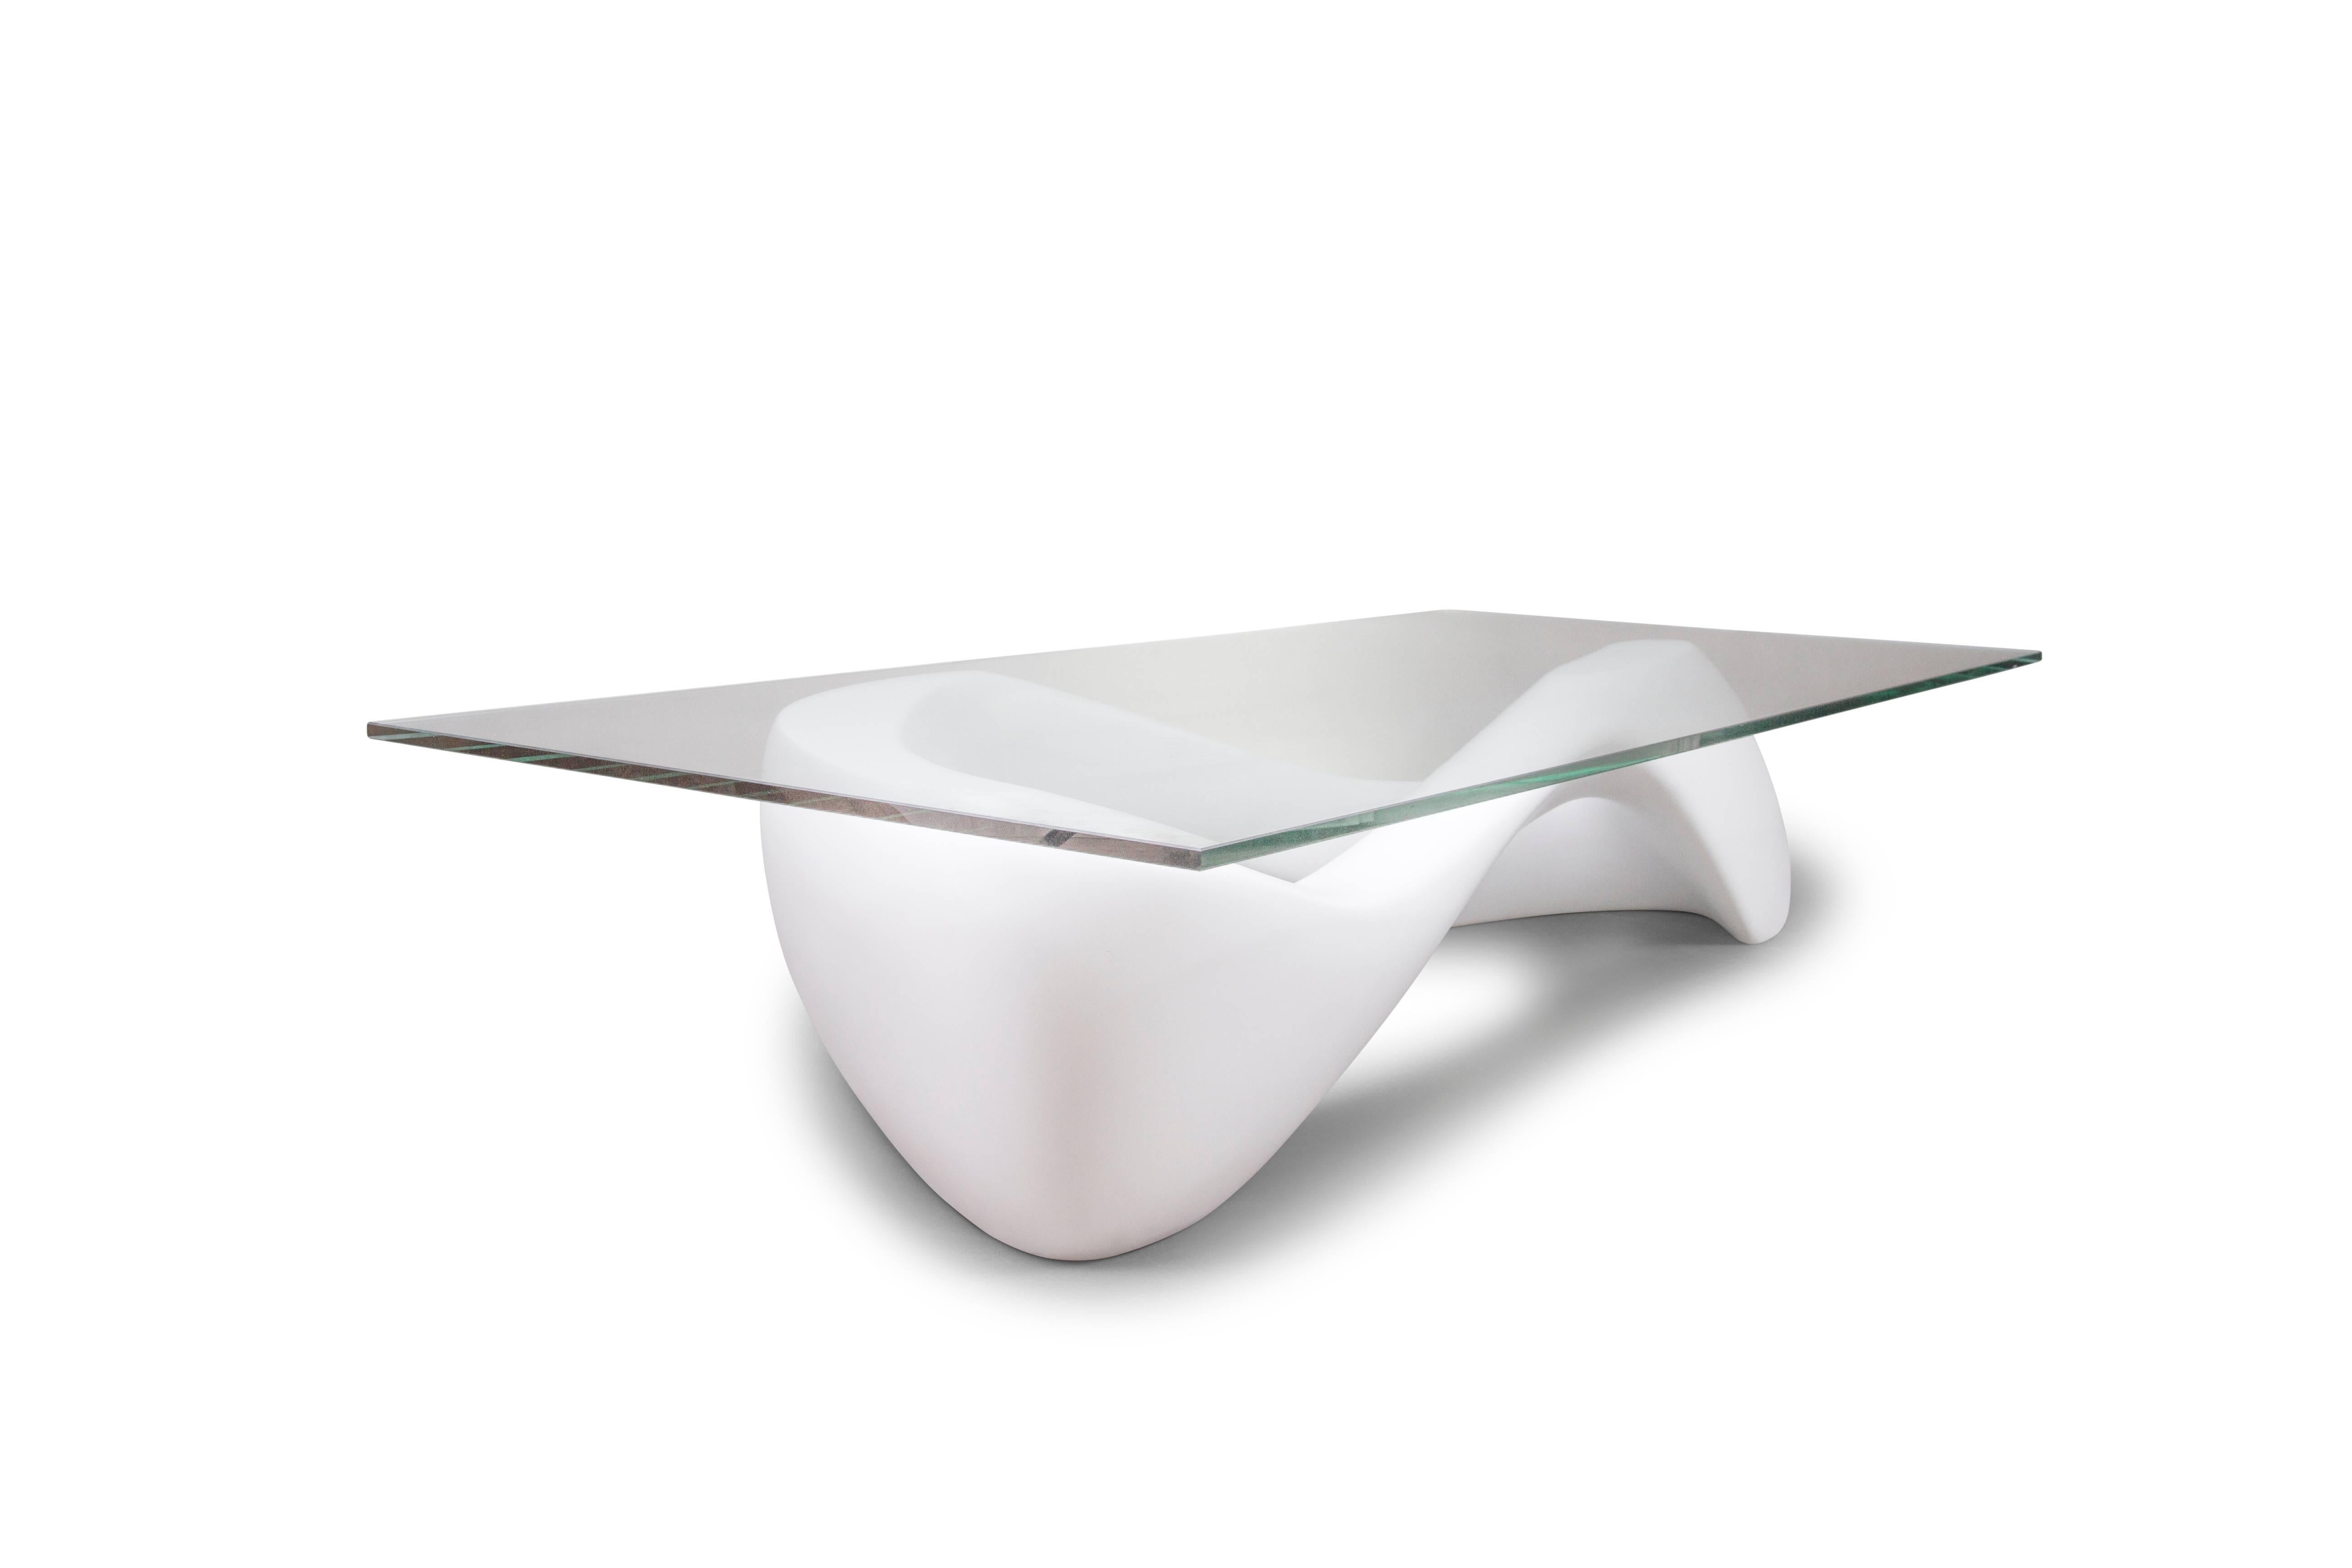 Amorph Lust Coffee Modern Table with glass top, White Lacquer  In New Condition For Sale In Los Angeles, CA